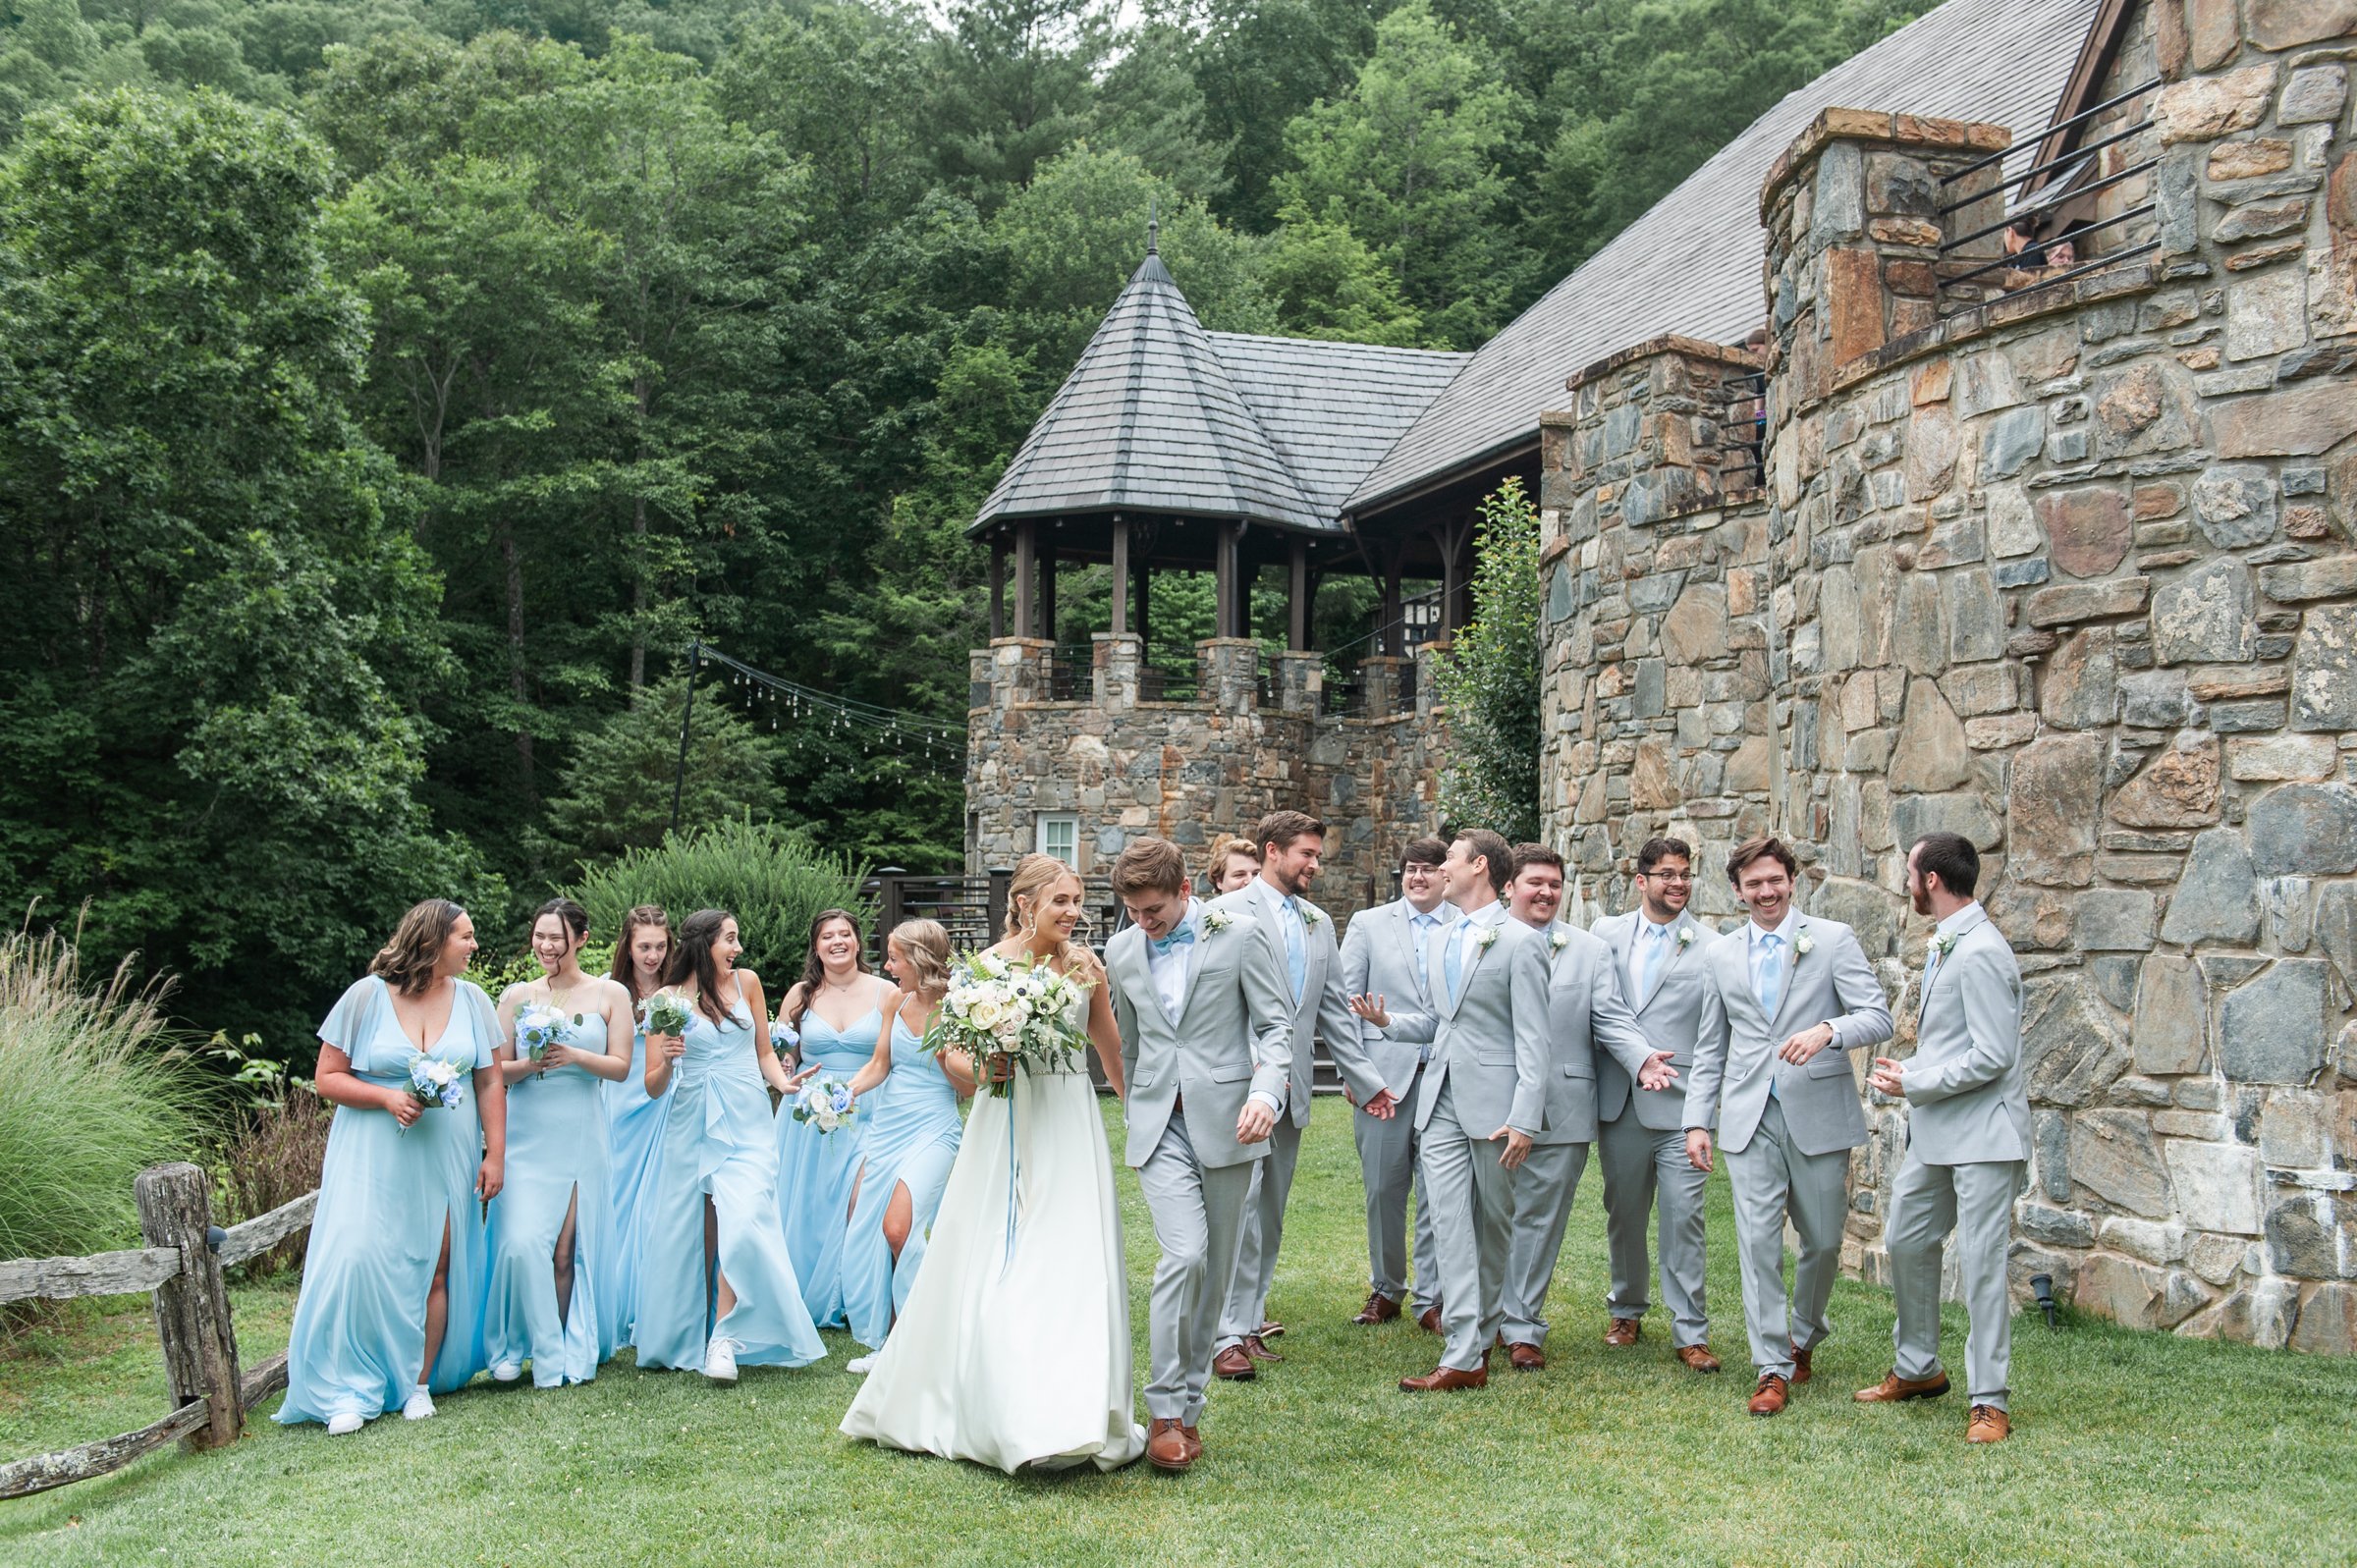 Castle Ladyhawke Wedding Party | Kimberly Cauble Photography